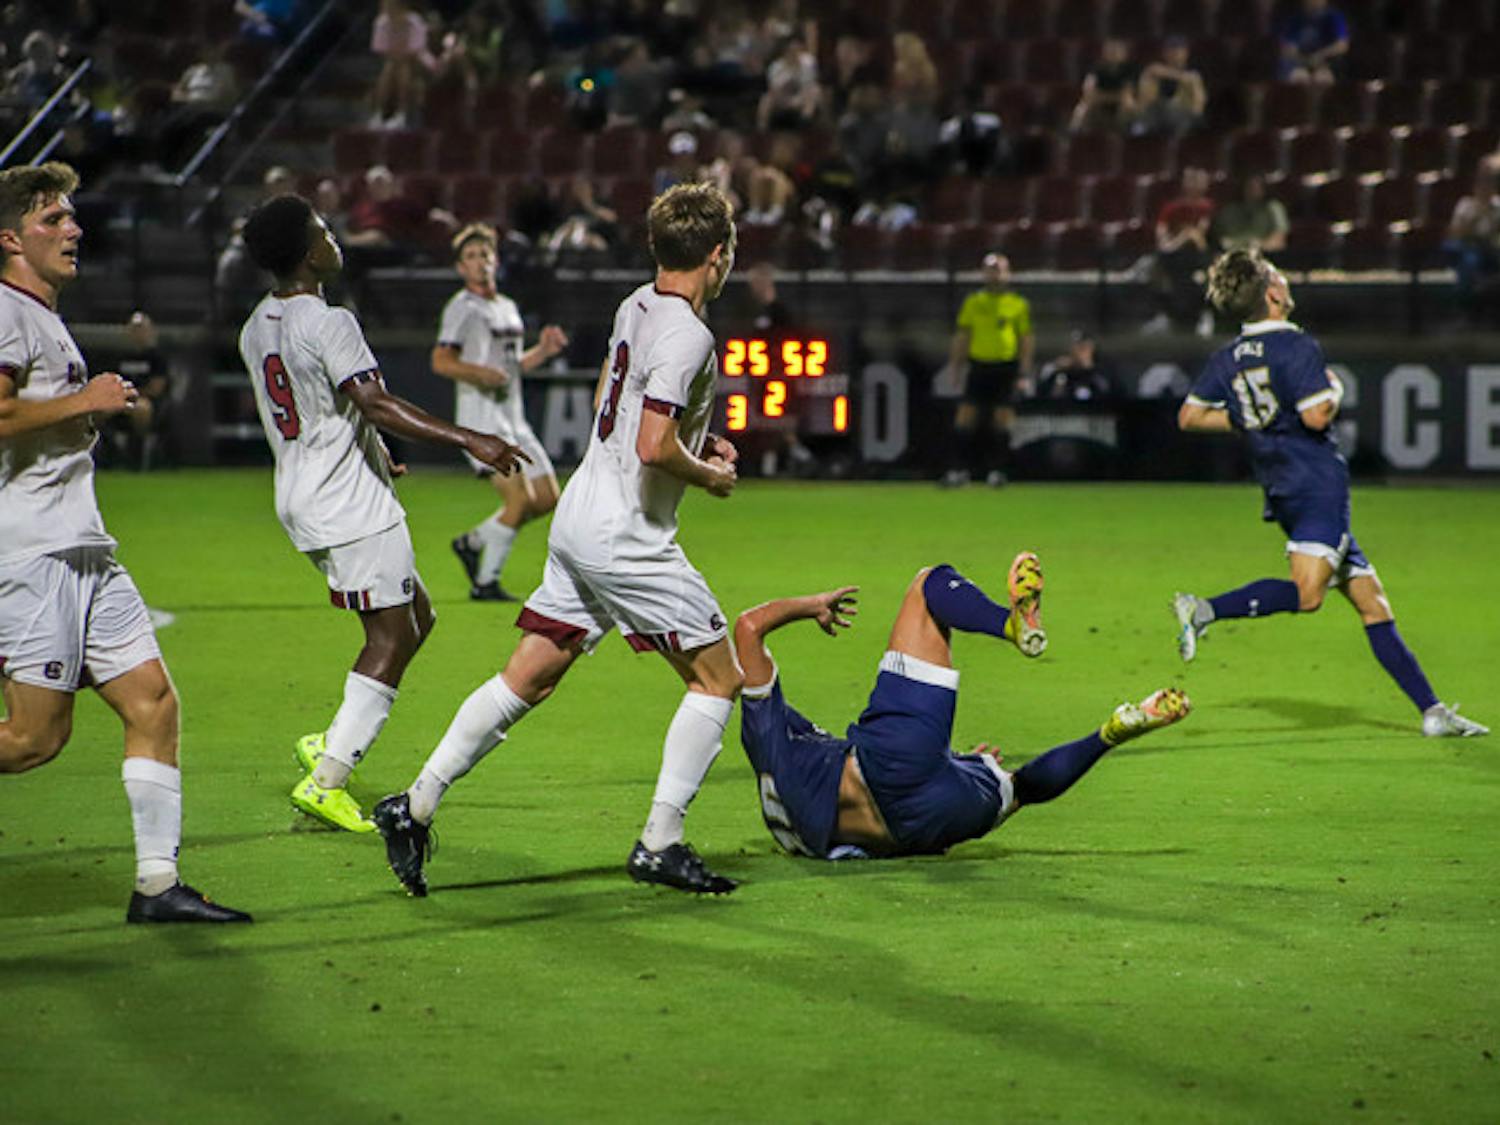 A Queens player falls during the matchup with South Carolina on Sept. 20, 2022. Queens received three yellow cards during the game and the Gamecocks received two.